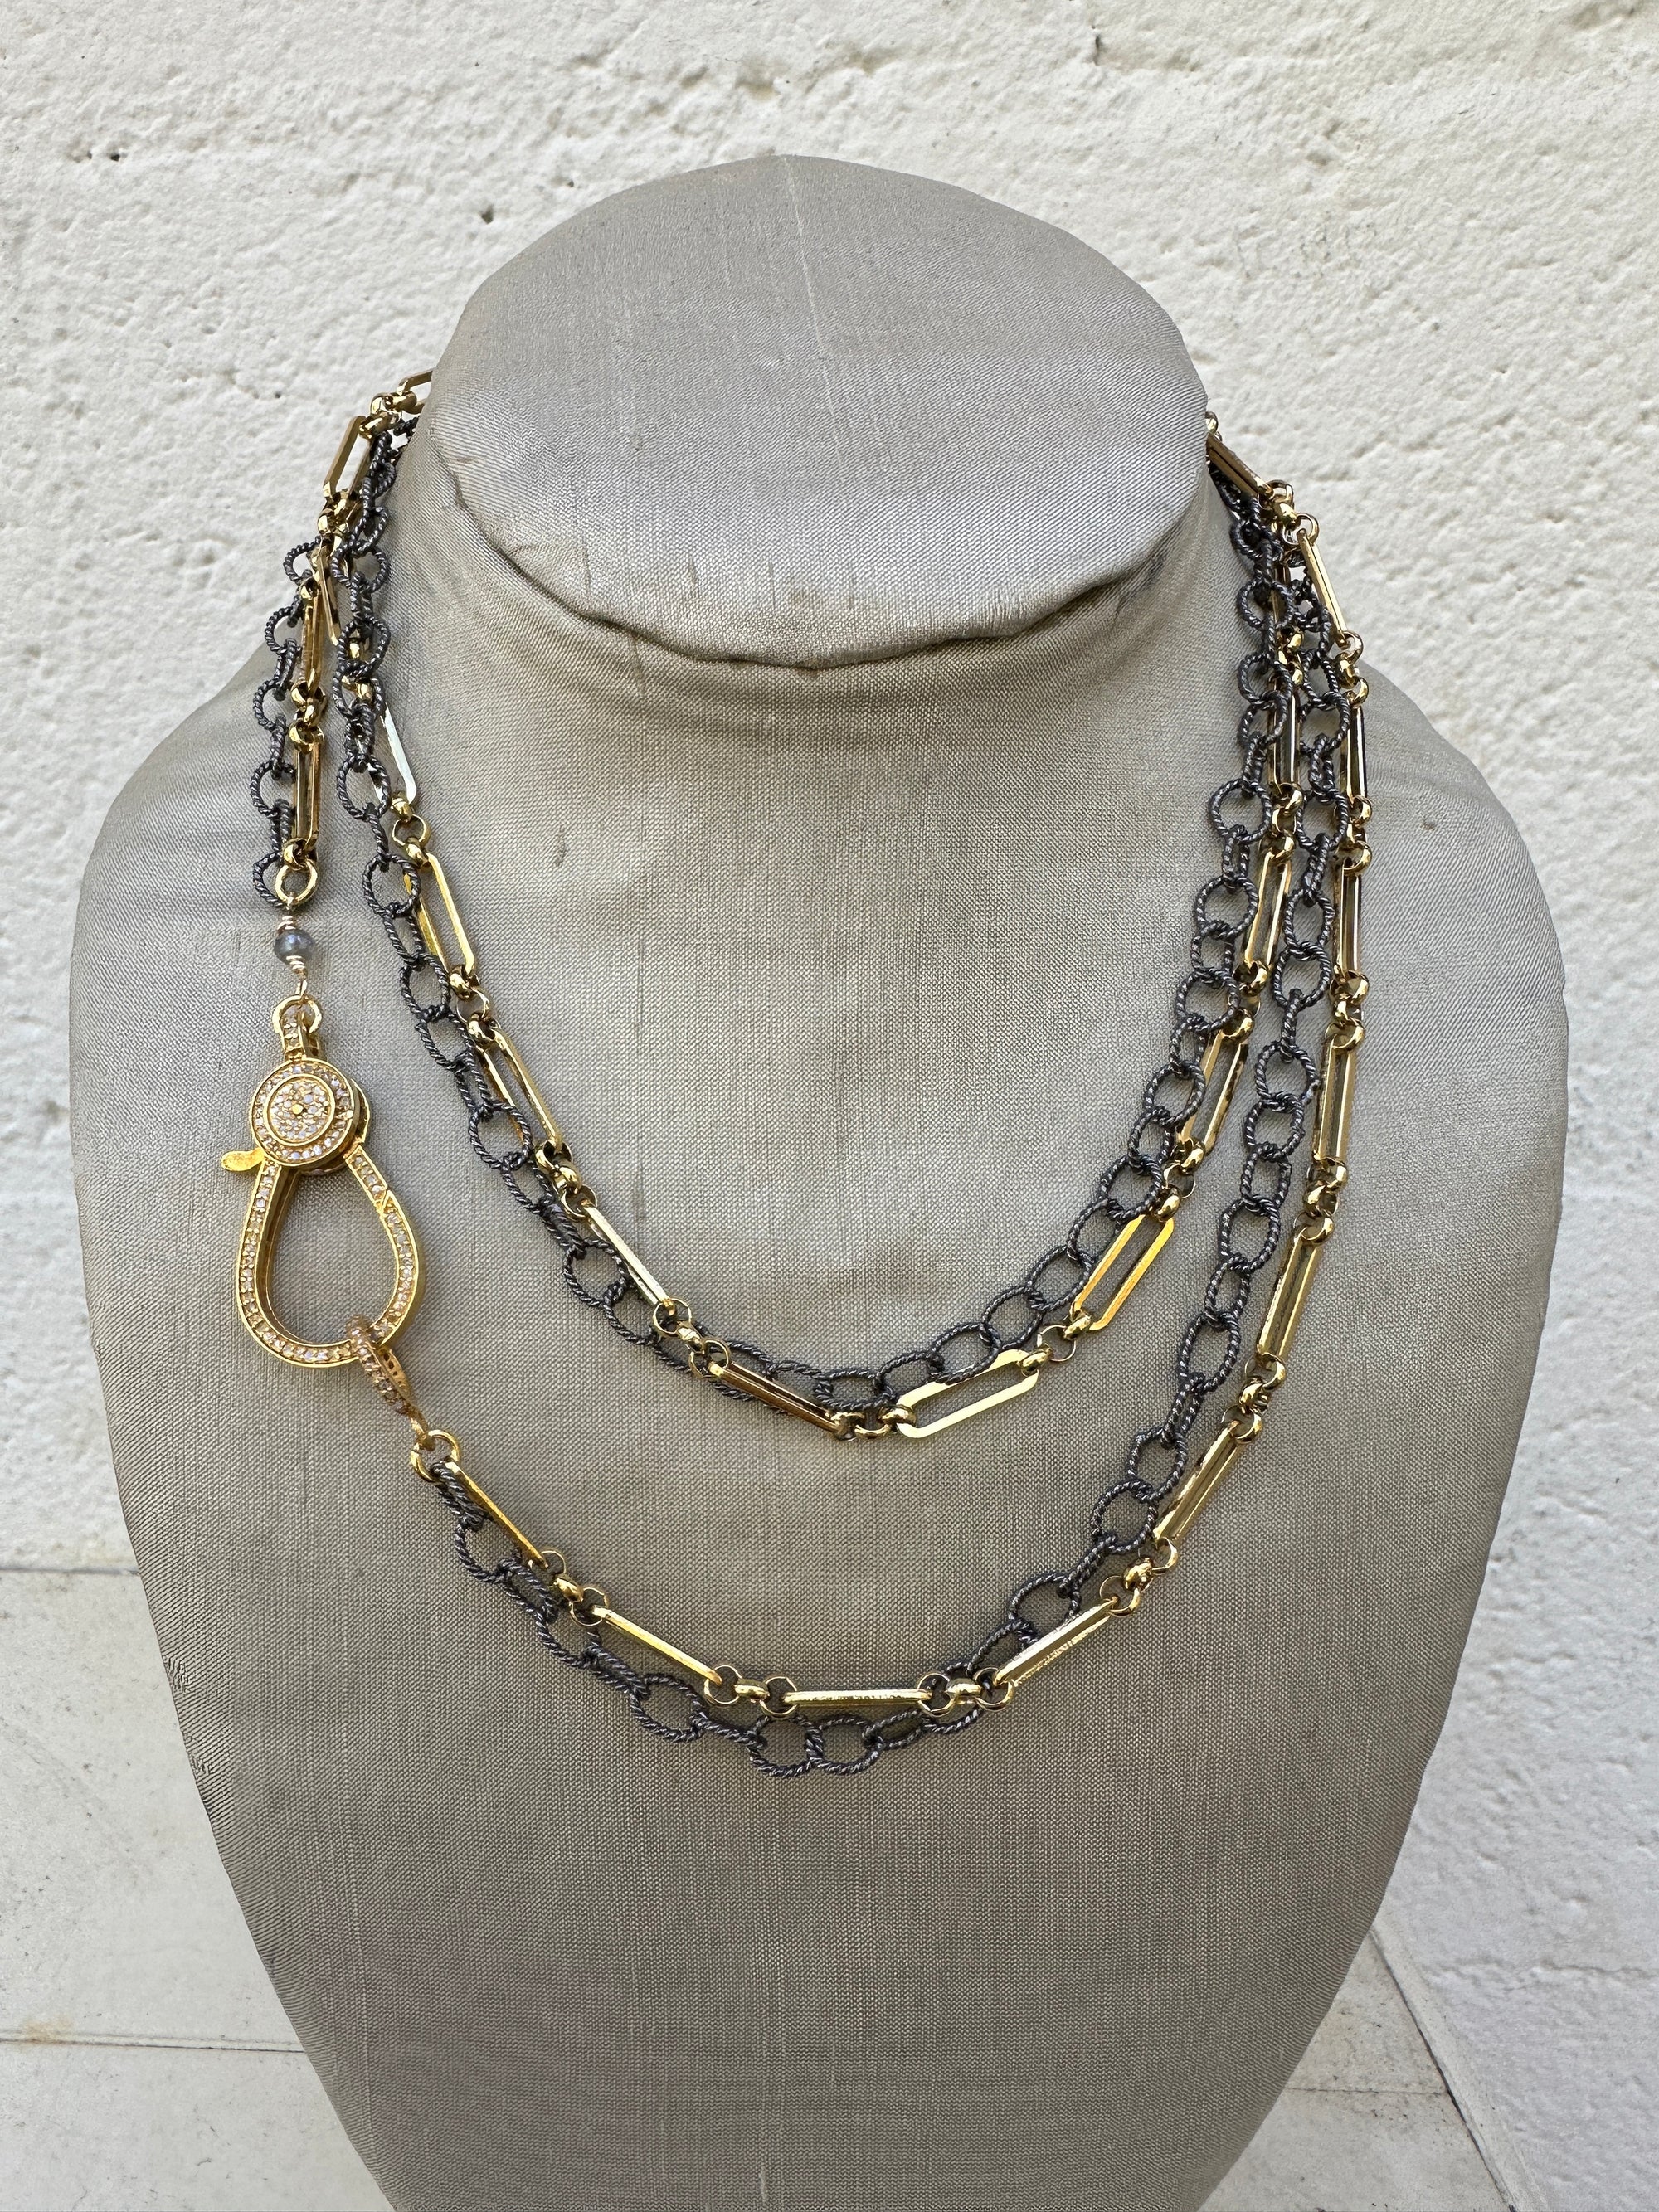 Long Mixed Chains, Pave Diamond Clasp